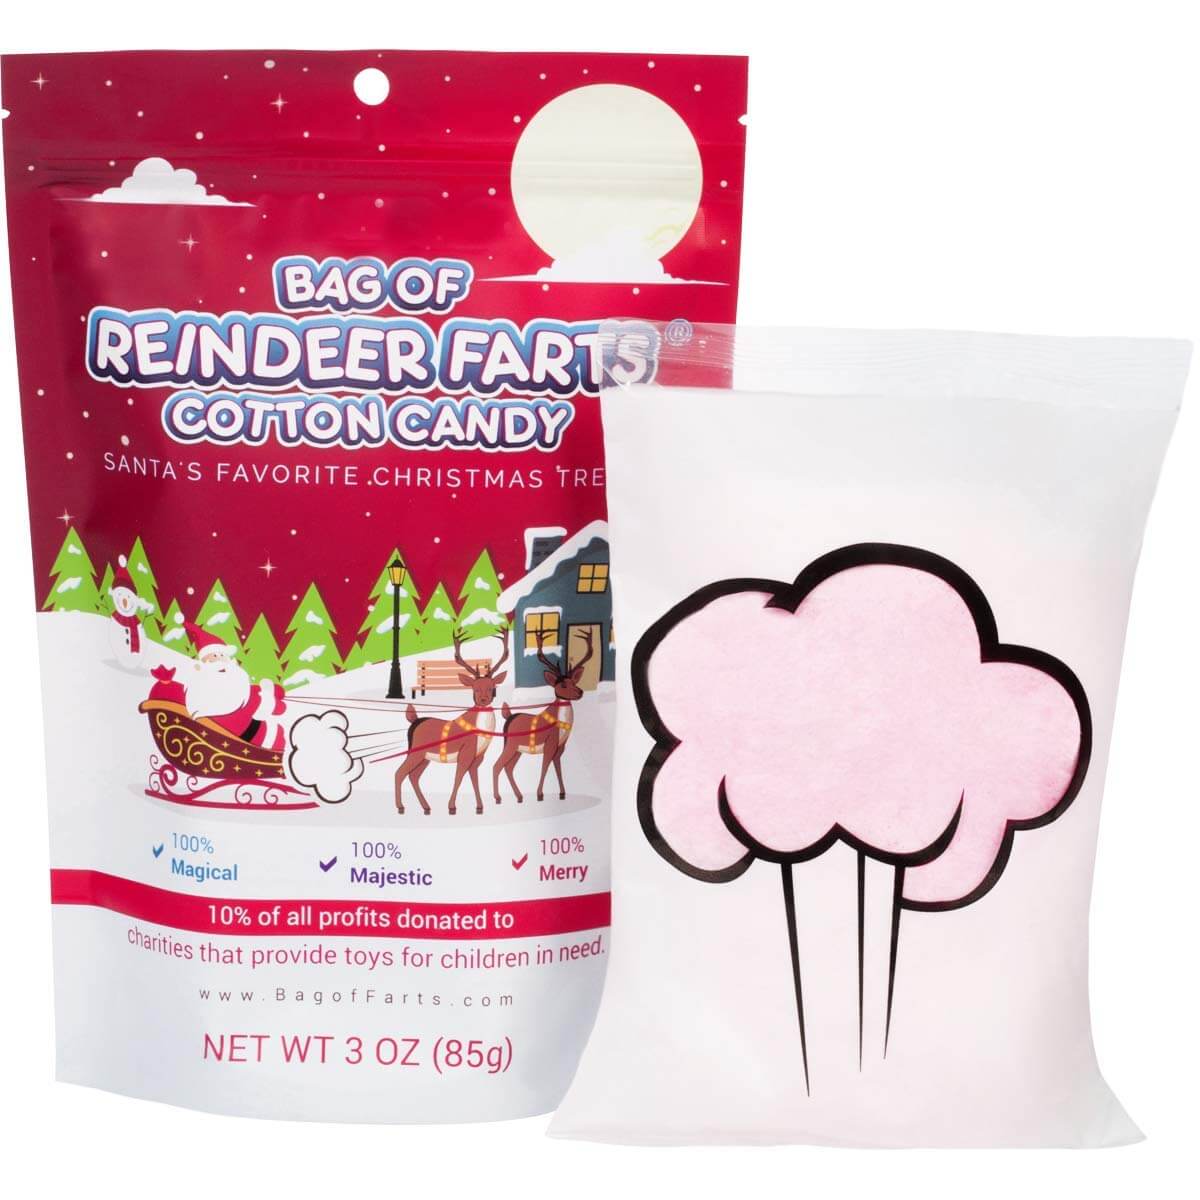 Bag Of Reindeer Farts Peppermint Cotton Candy